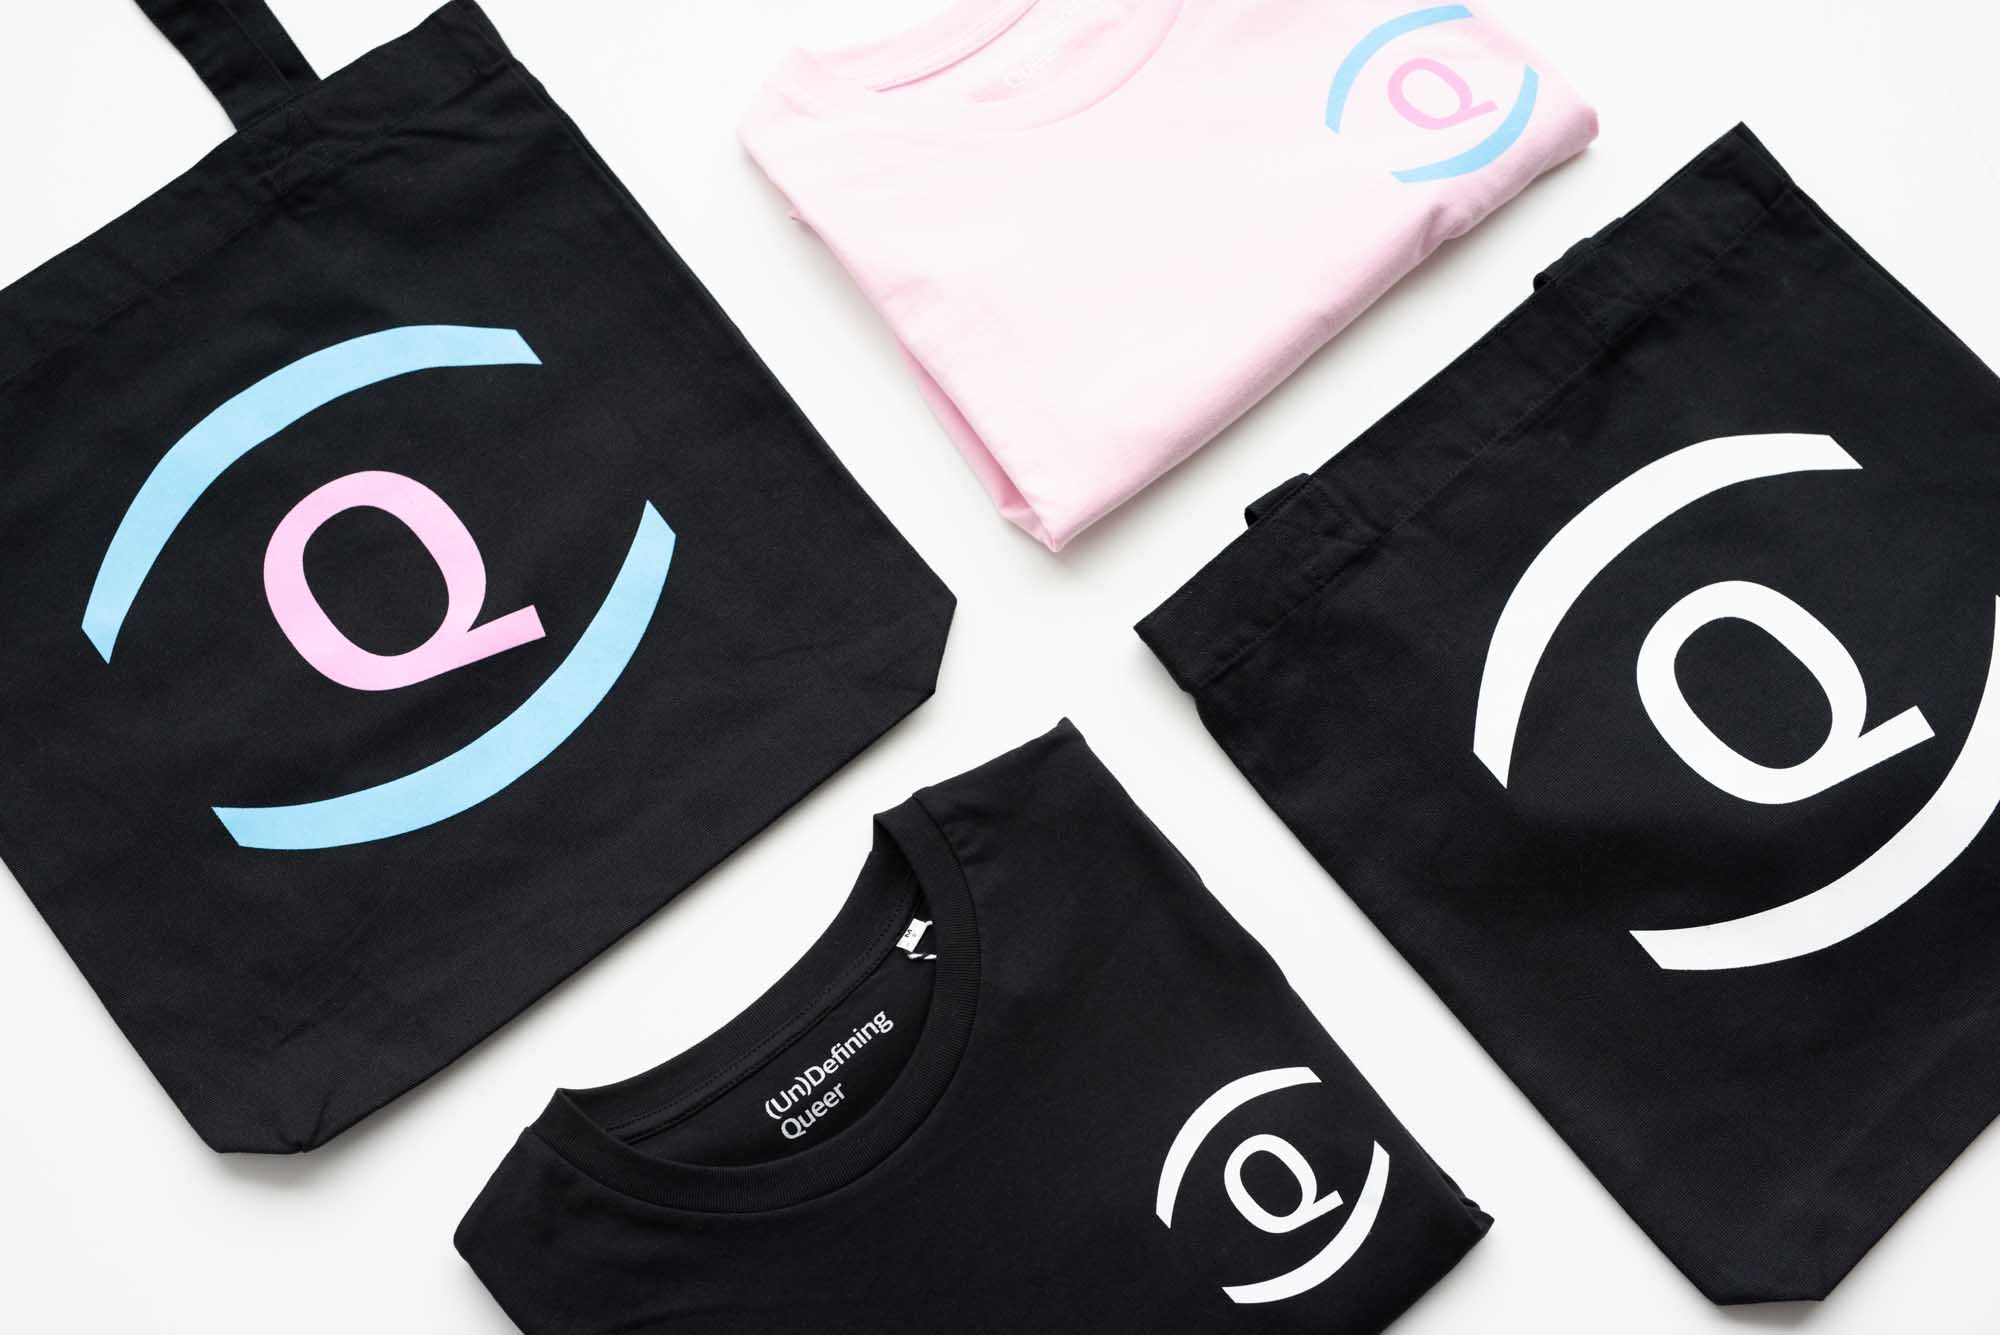 Flatlay image of pink t-shirts and tote bags folded on a white table with UnDefining Queer logo